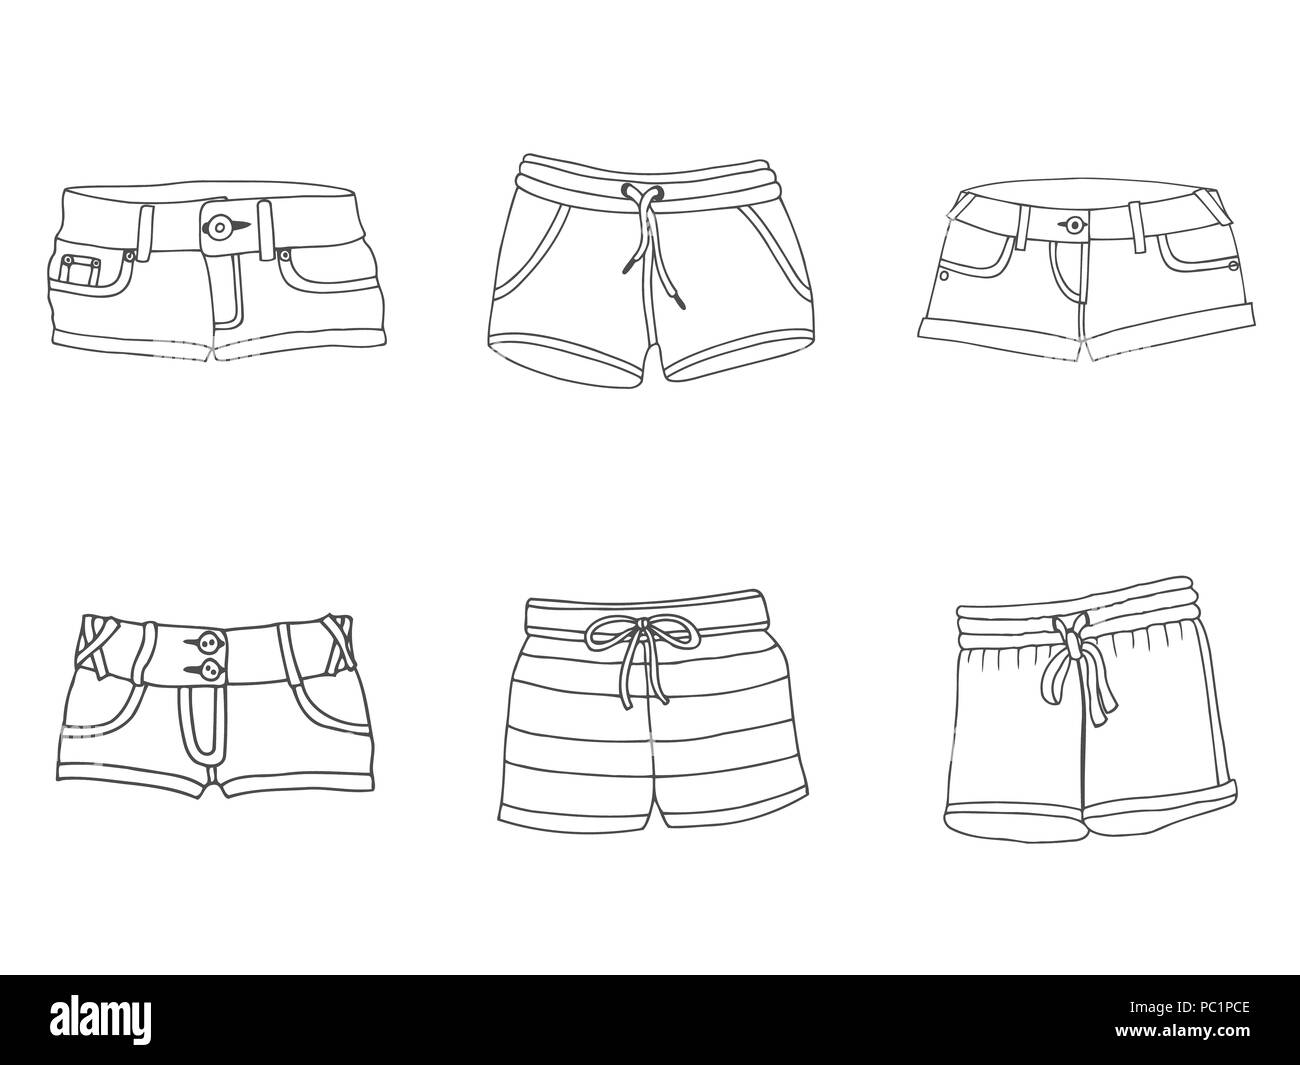 Fashion technical sketch of woman Denim Shorts in graphic Stock Photo -  Alamy